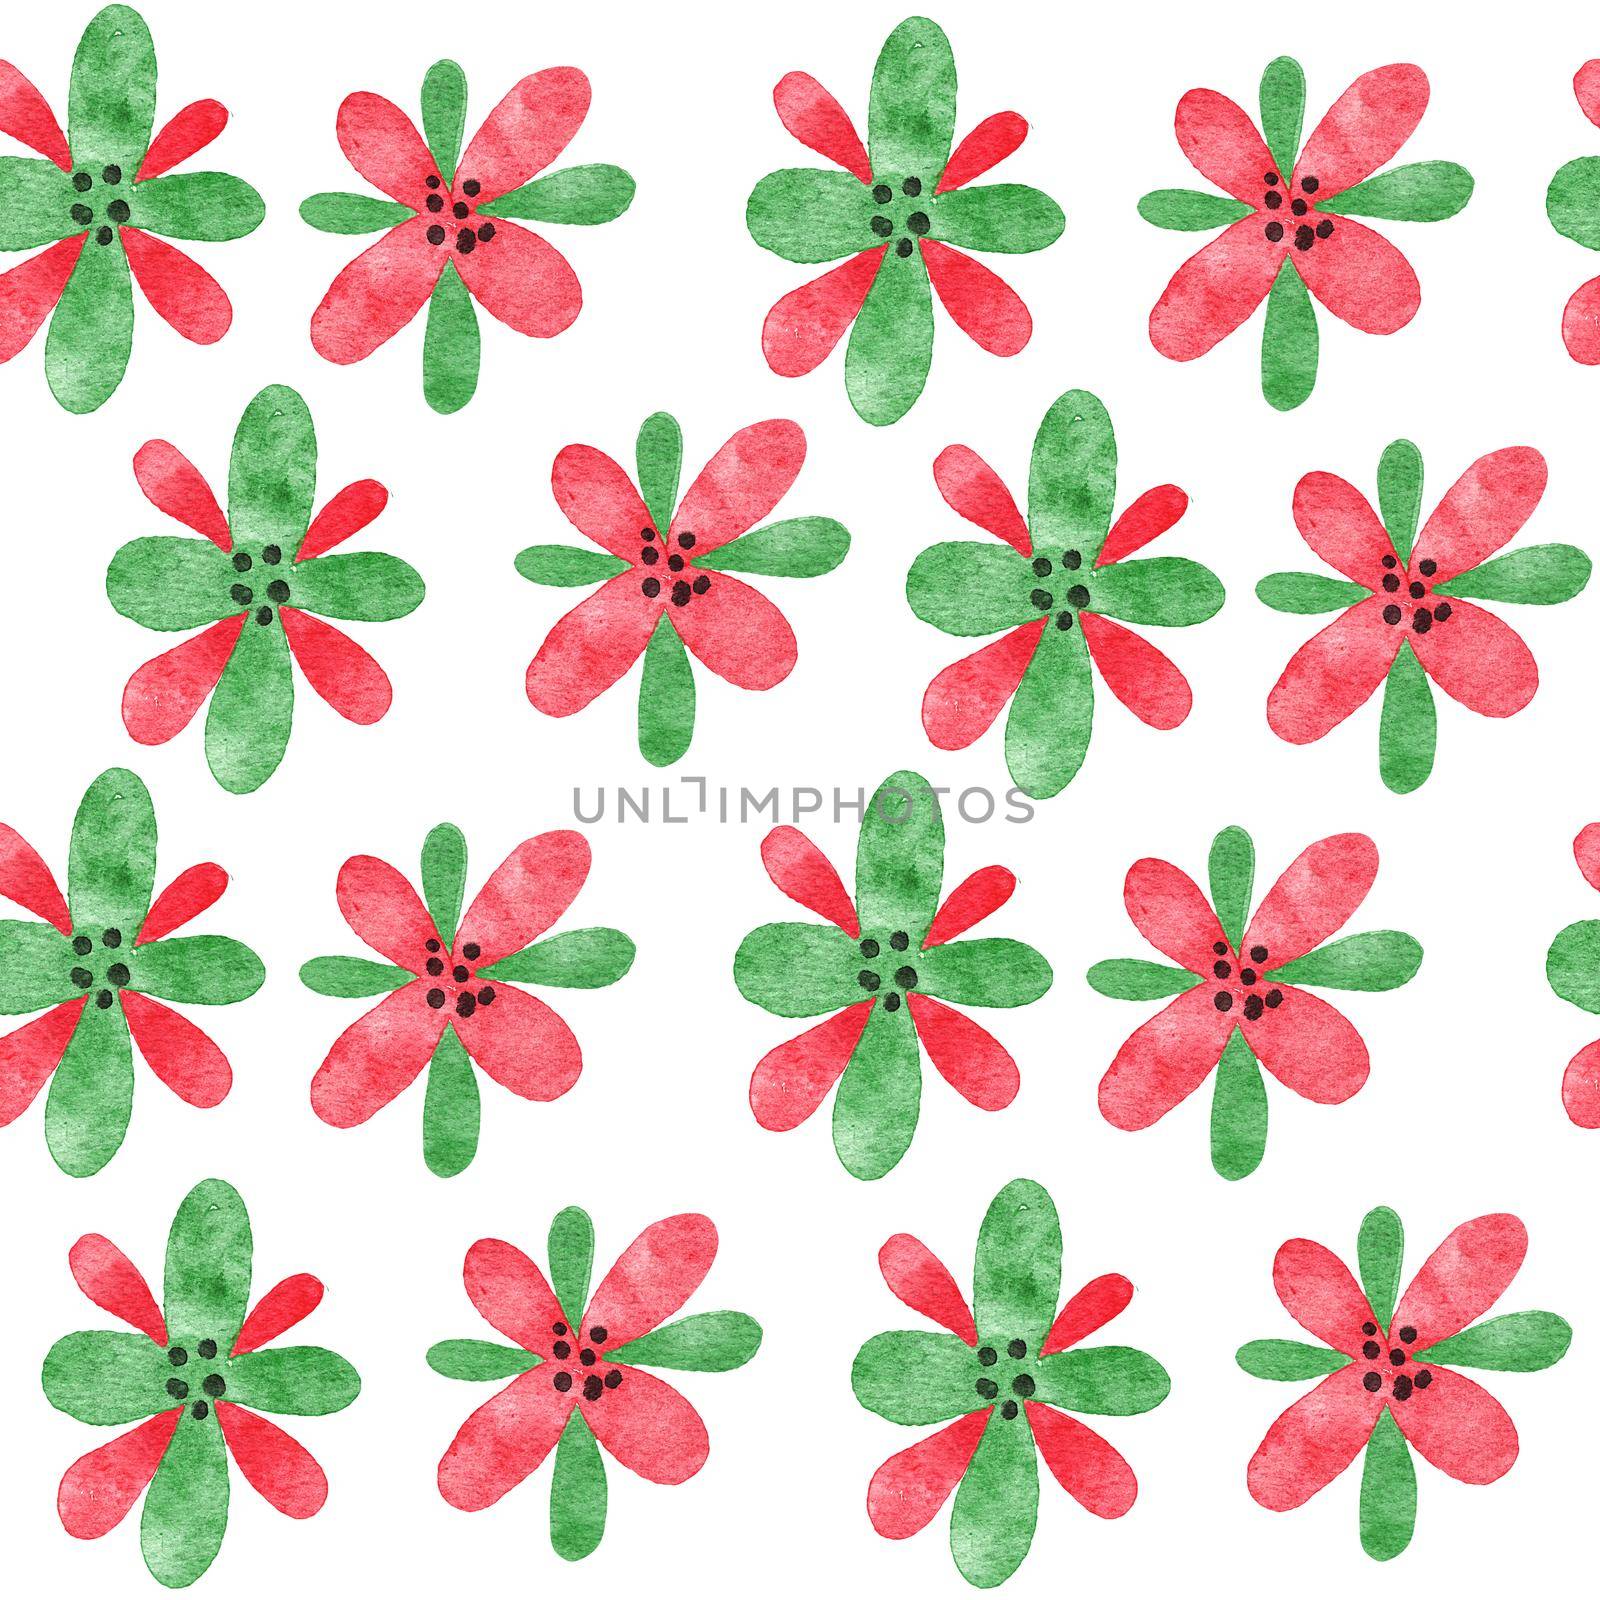 Watercolor seamless hand drawn pattern with red green abstract shapes elements flowers, bright summer background. Minimalist modern fabric print design for textile wallpaper wrapping paper, simple organic forms